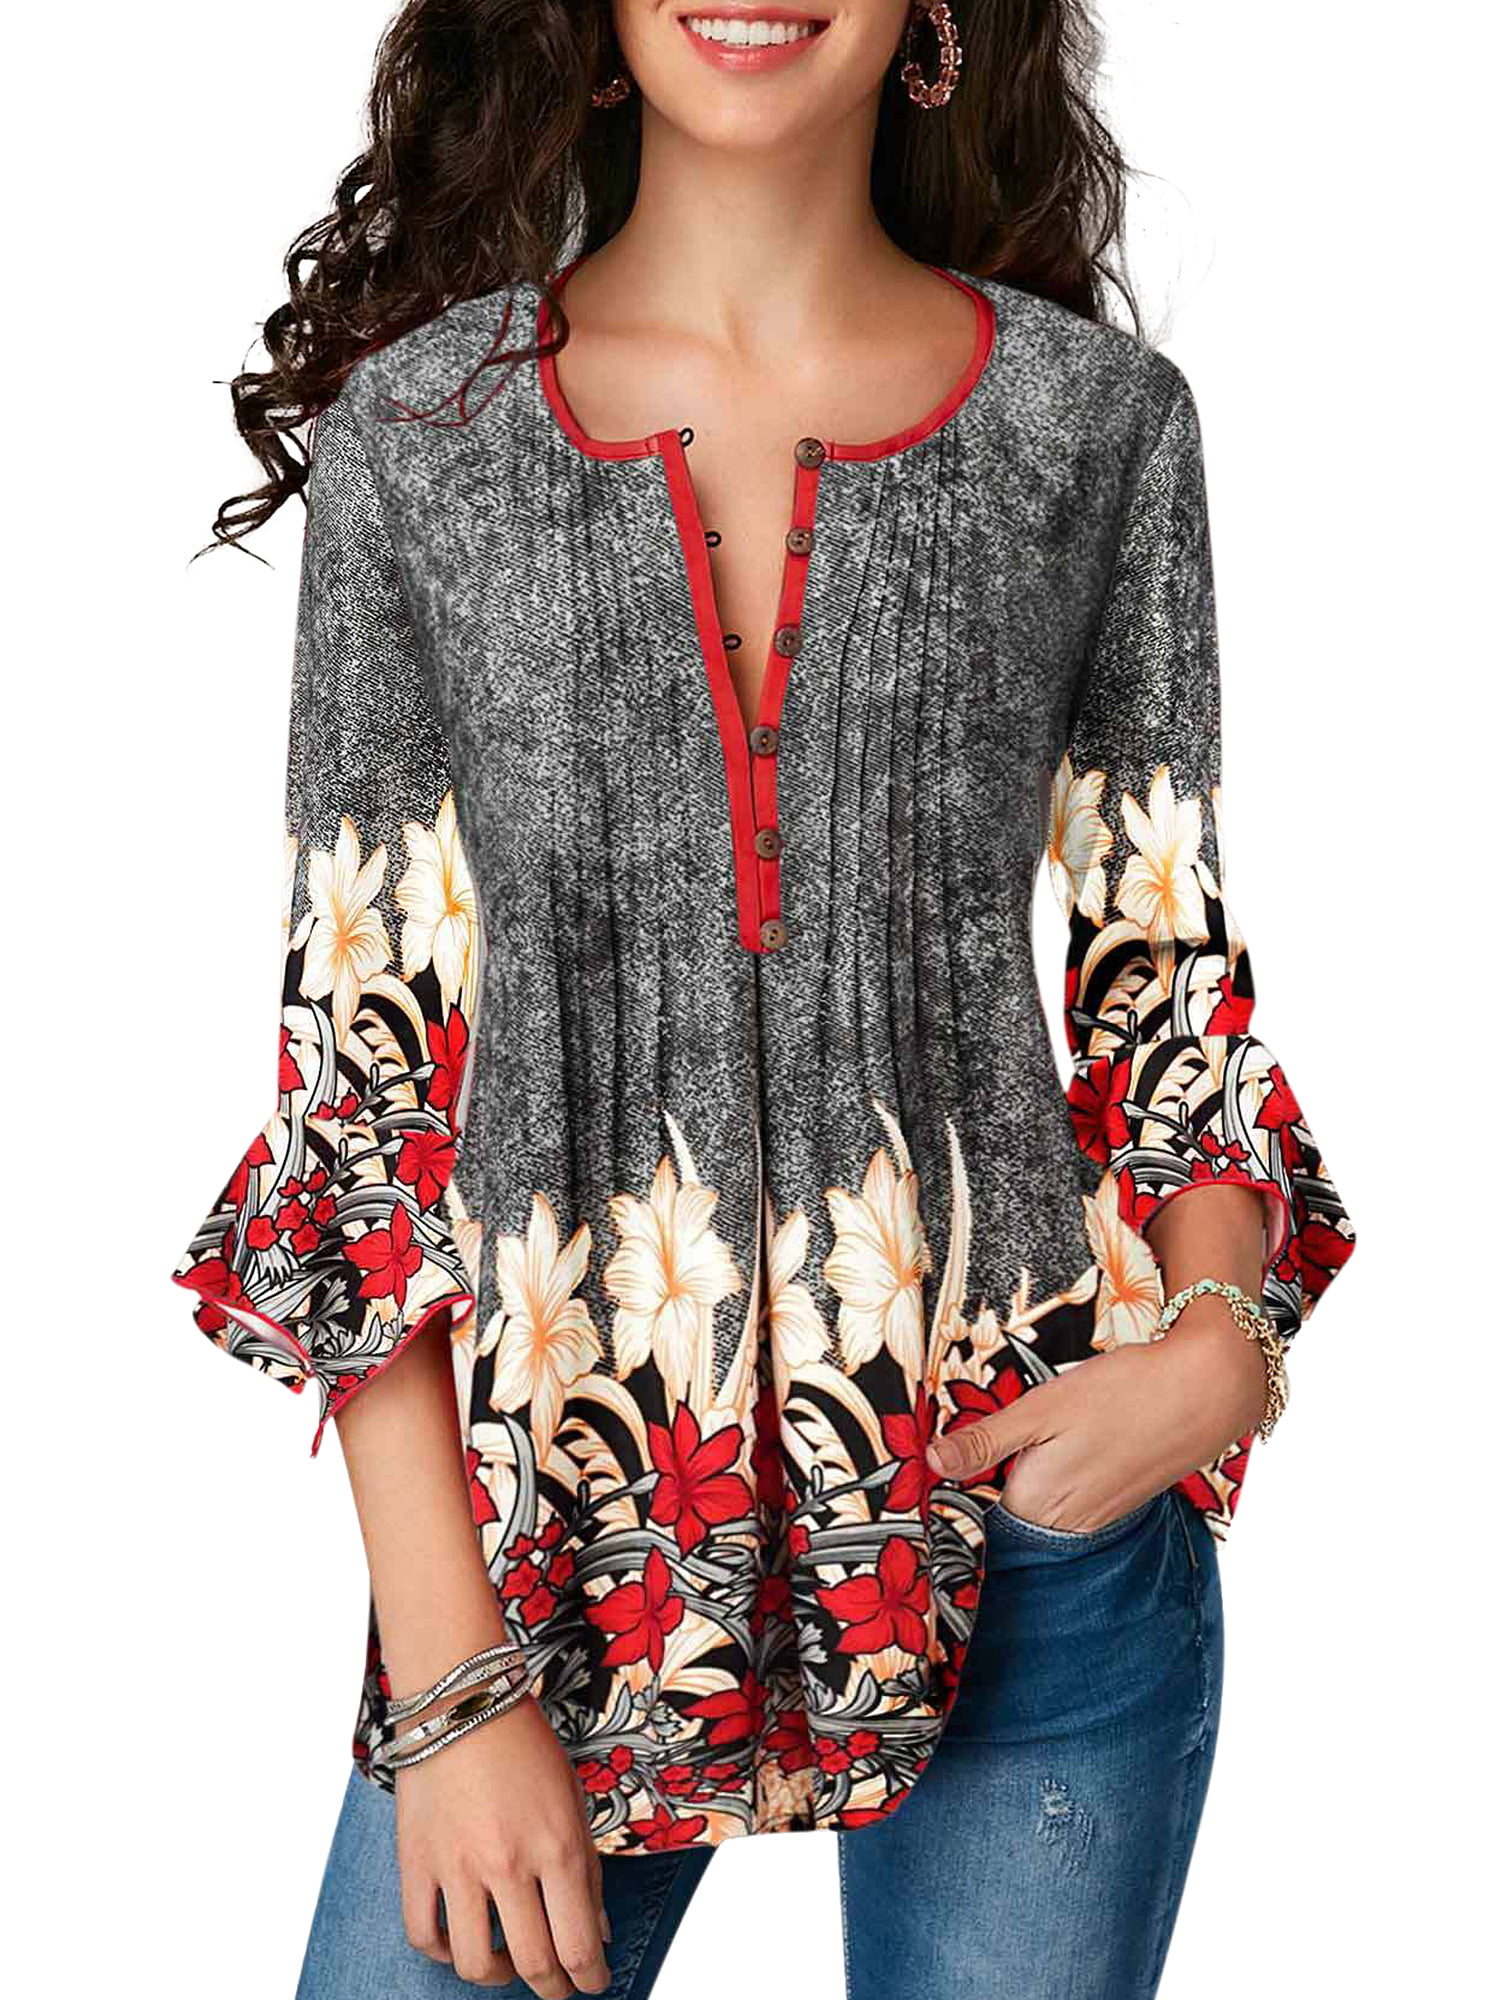 Womens Henley V Neck Chiffon Shirt Summer Floral Print Tunic Tops Casual Long Sleeve Half Button Blouse Plus Size by YOMXL 